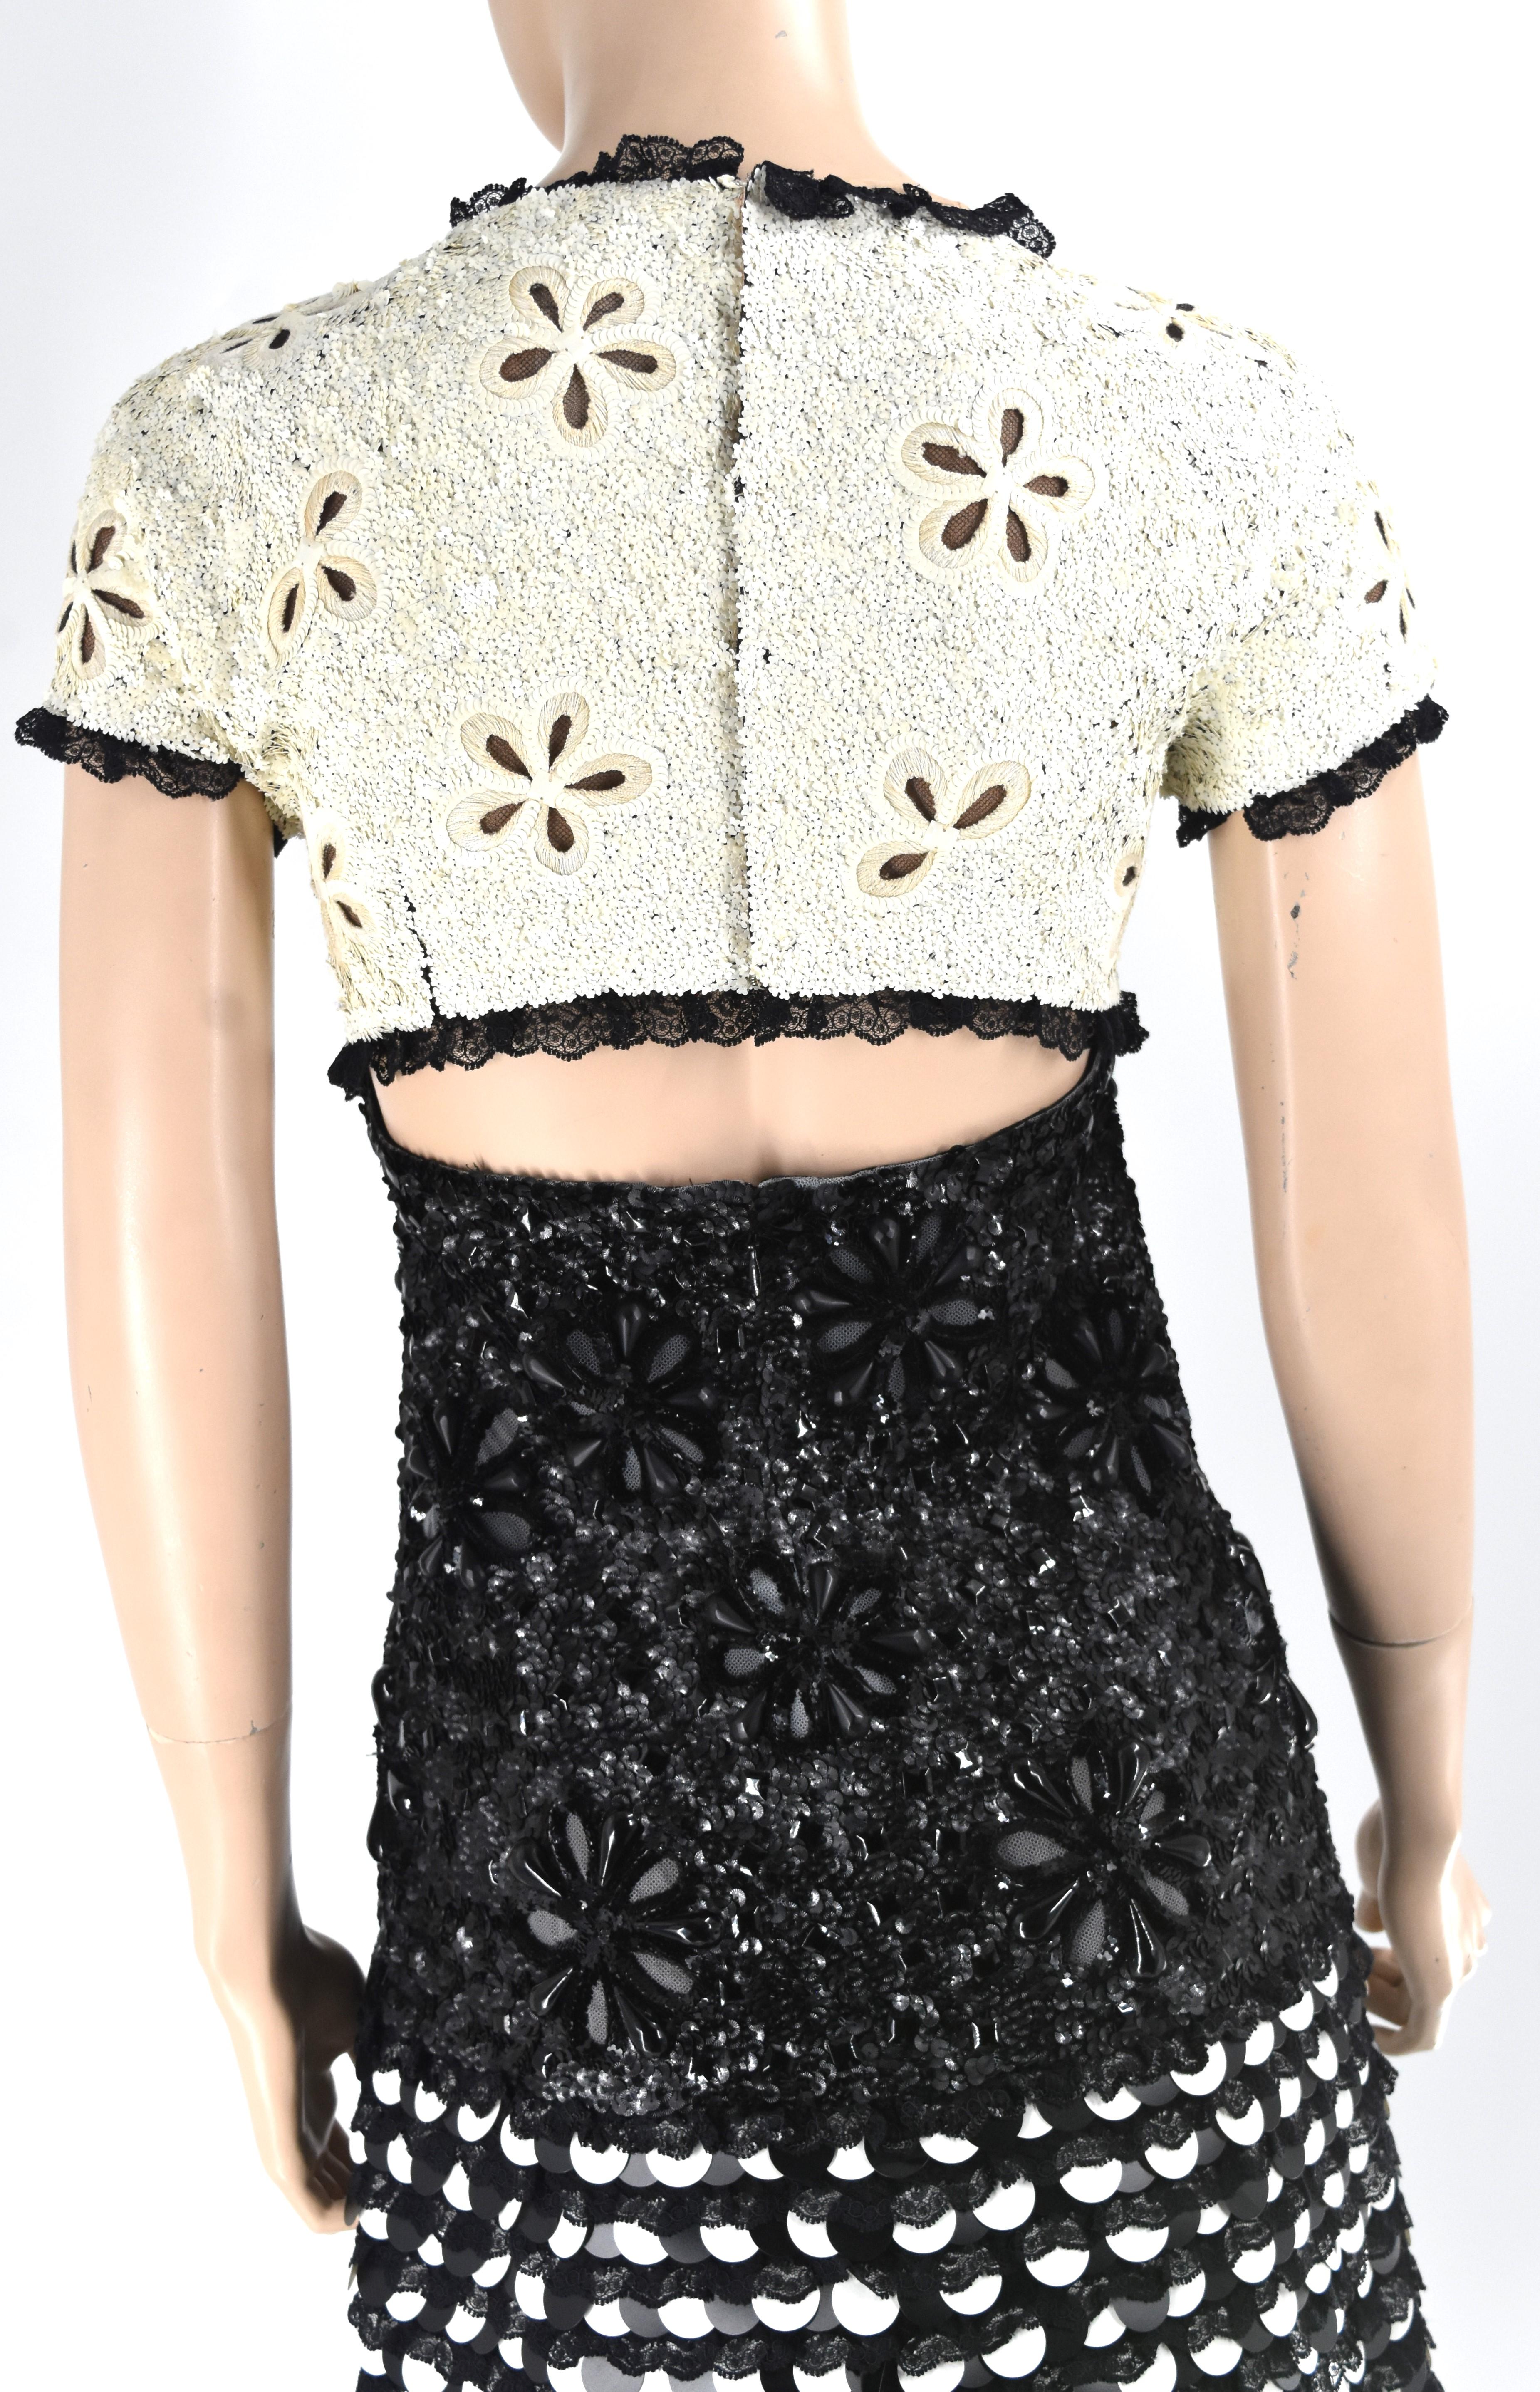 Chanel 11C Cruise 2011 Sequins Embellished runway Dress New Europe 36 In New Condition For Sale In Merced, CA